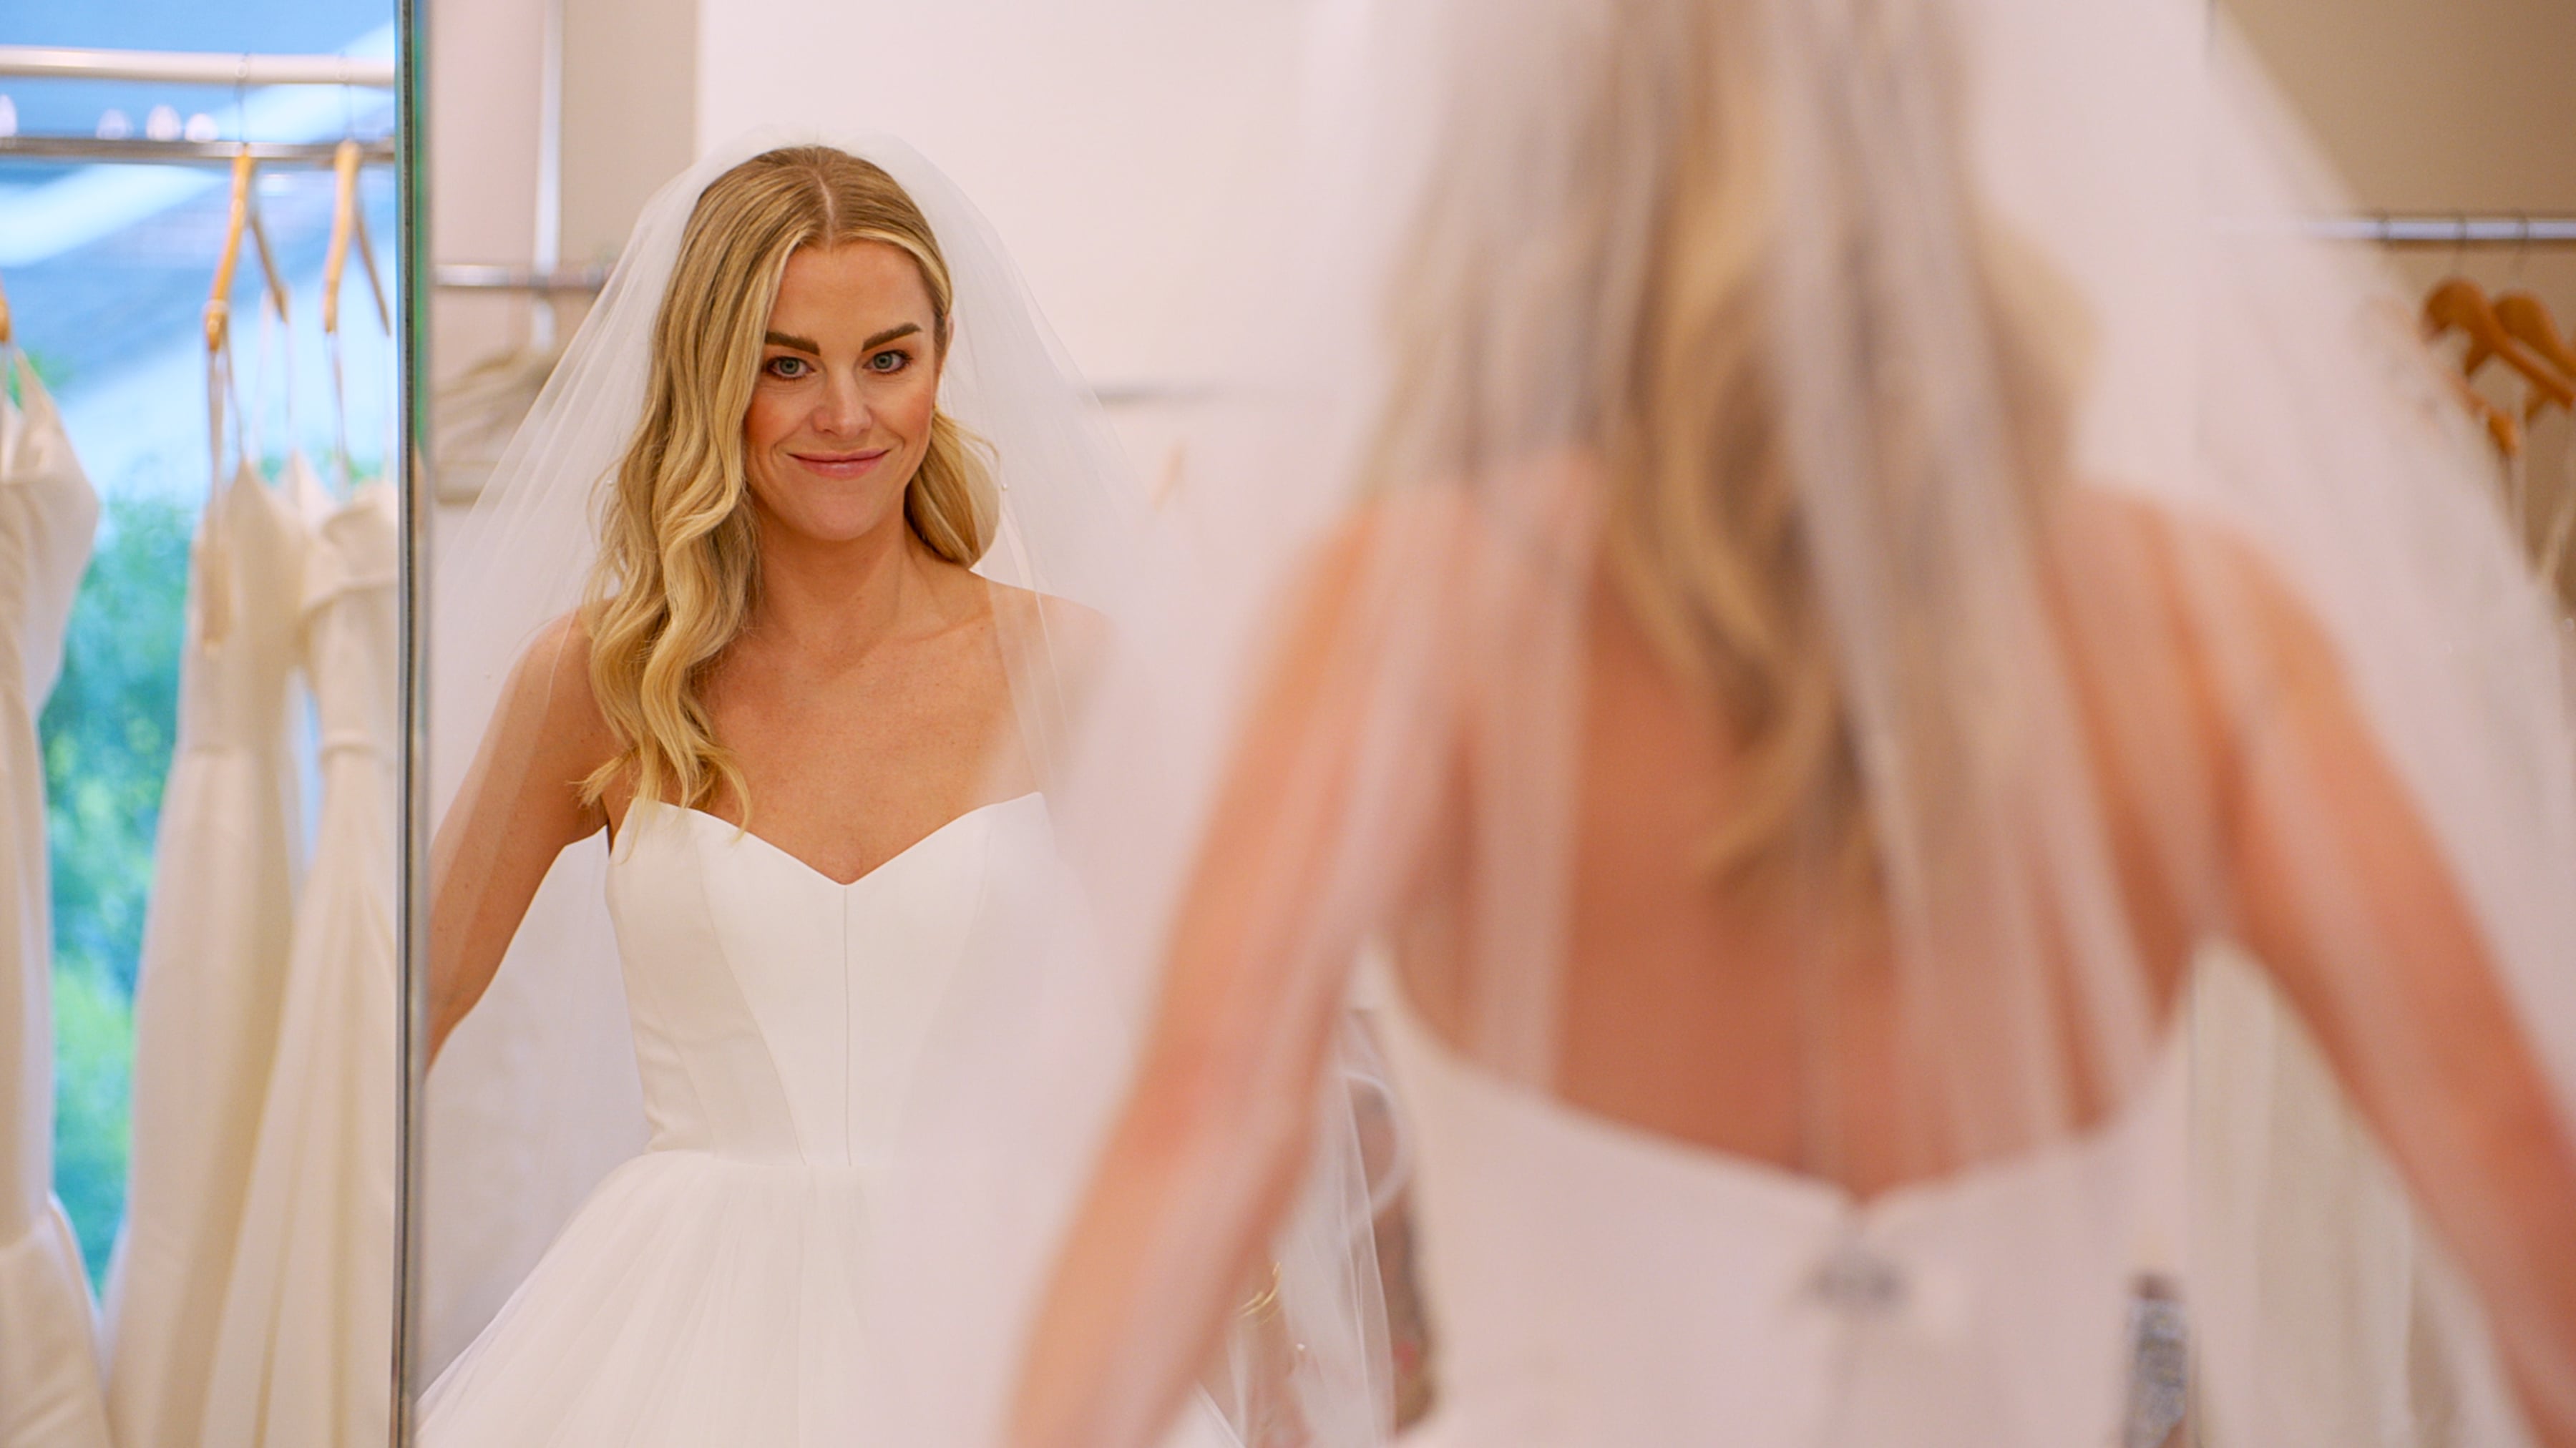 The Top 5 Newest Most Beautiful Bridal Gown Trends